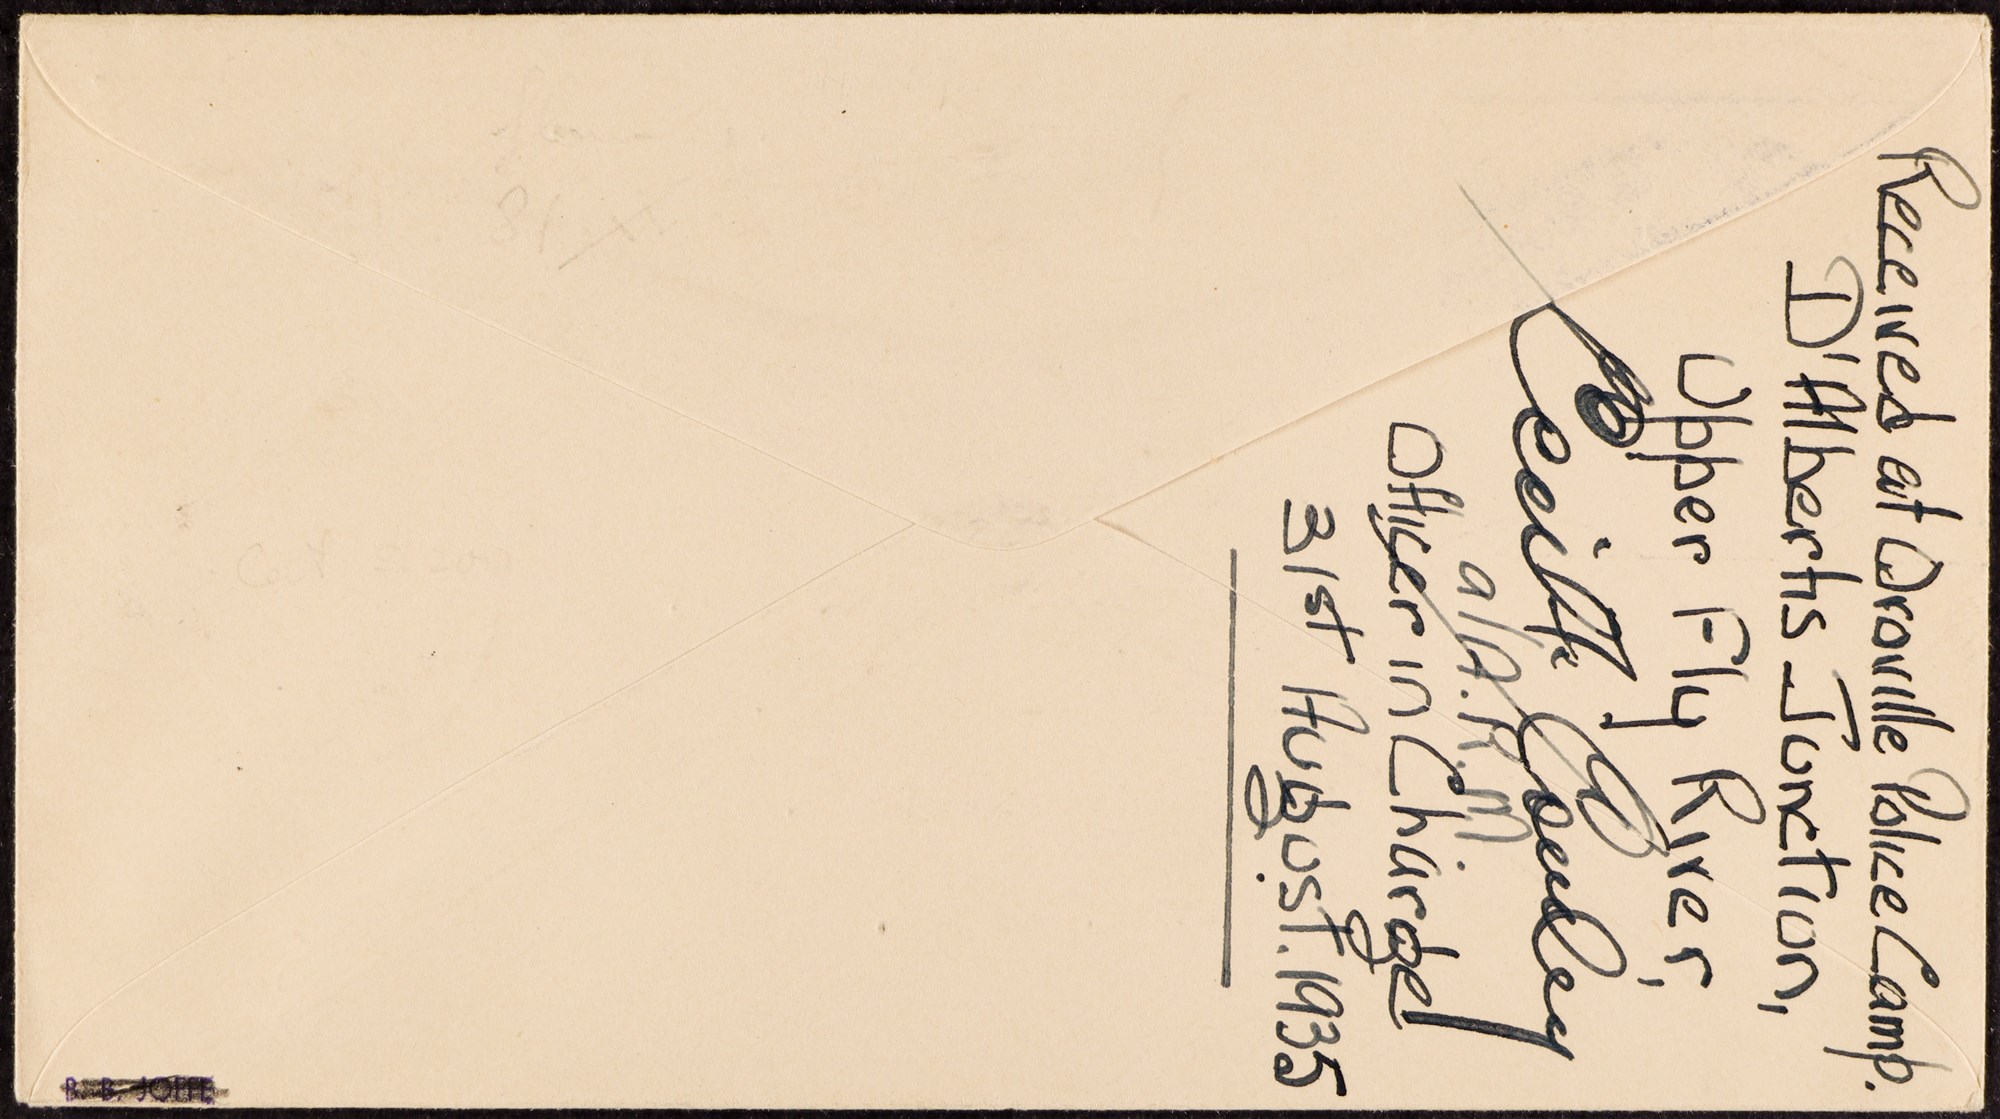 PAPUA AIRMAIL 1935 (31st August) Daru to Oroville Police Camp cover (Eustis P88), signed by the - Image 2 of 2